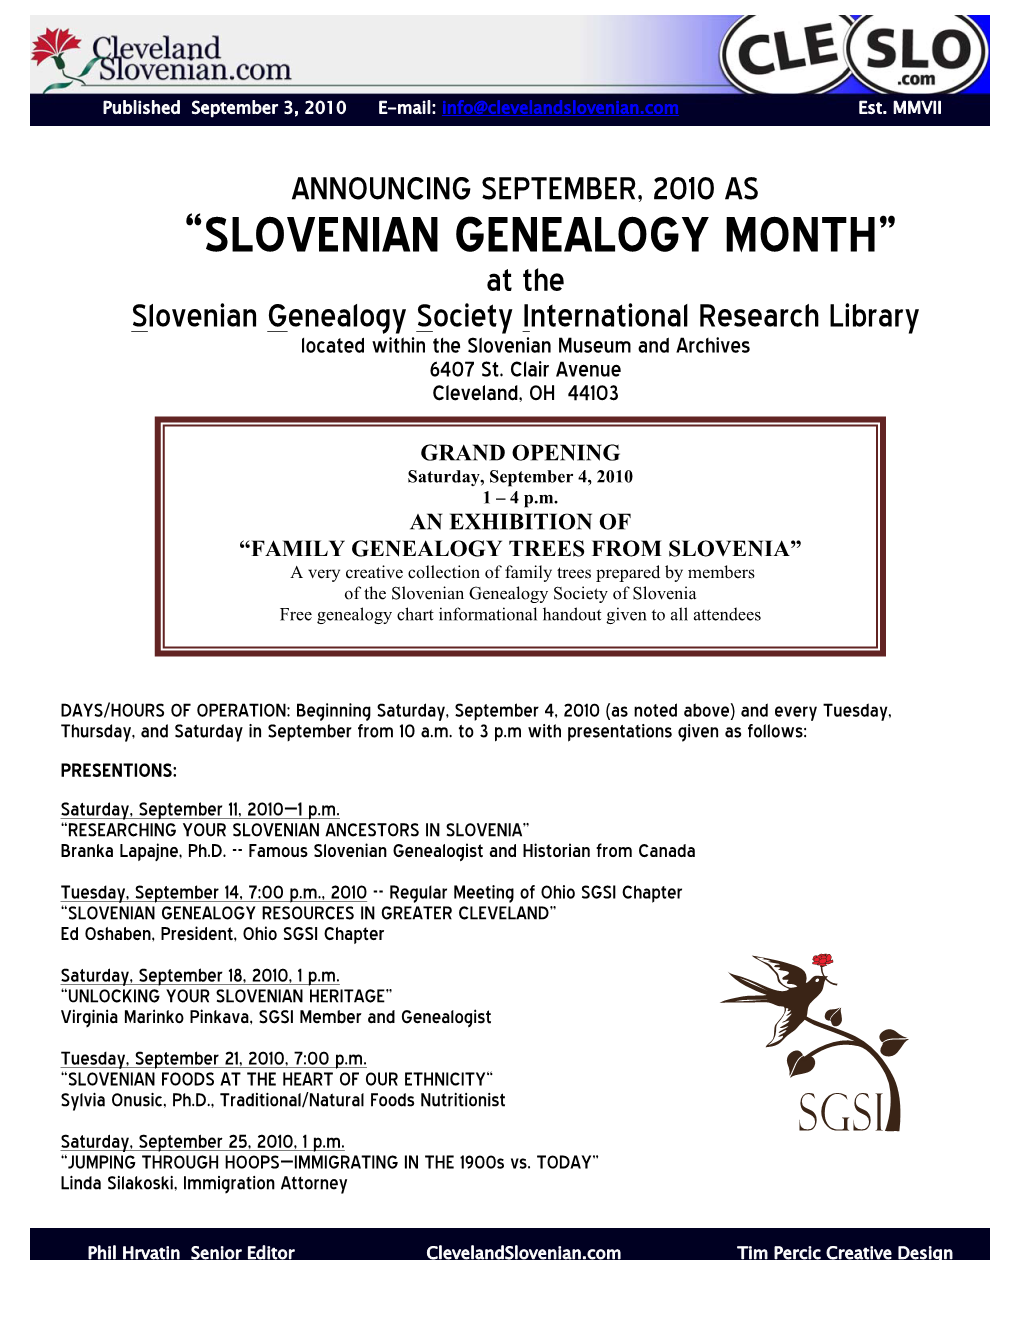 “SLOVENIAN GENEALOGY MONTH” at the Slovenian Genealogy Society International Research Library Located Within the Slovenian Museum and Archives 6407 St